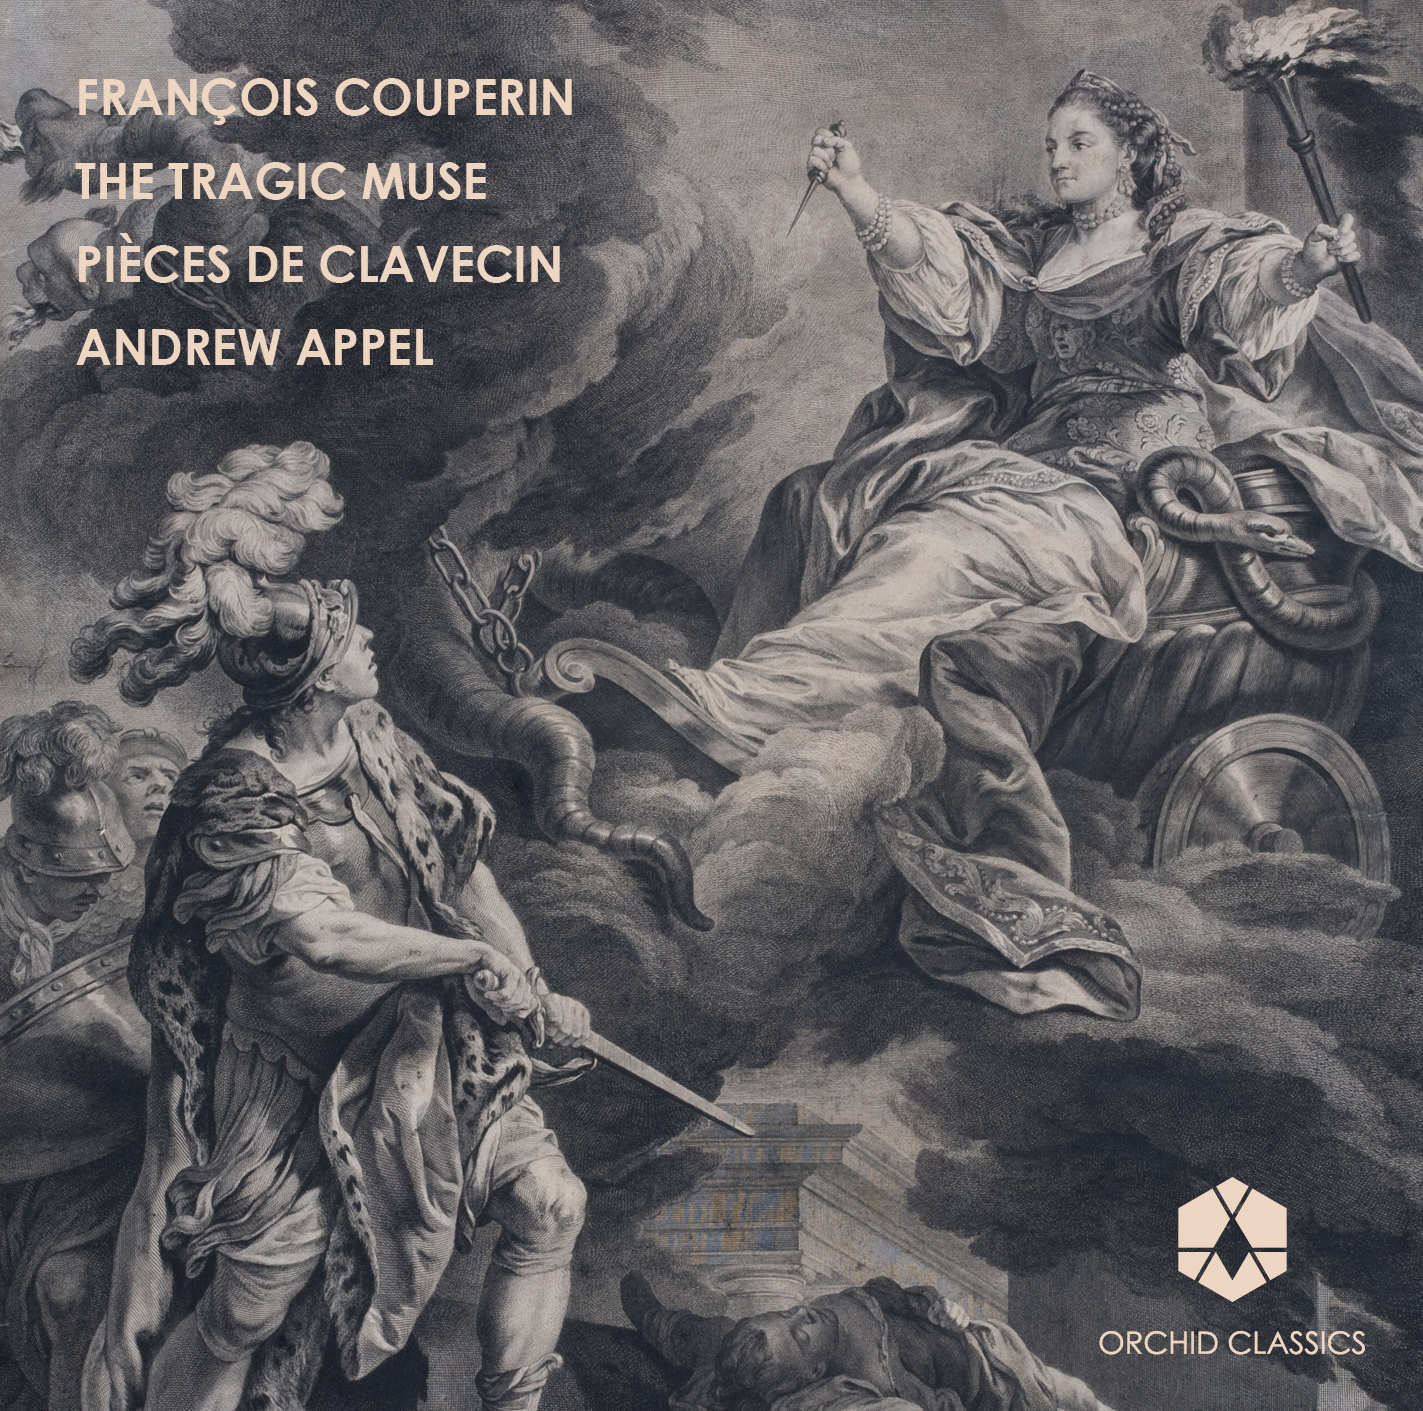 Francois Couperin: The beginning of a long look.